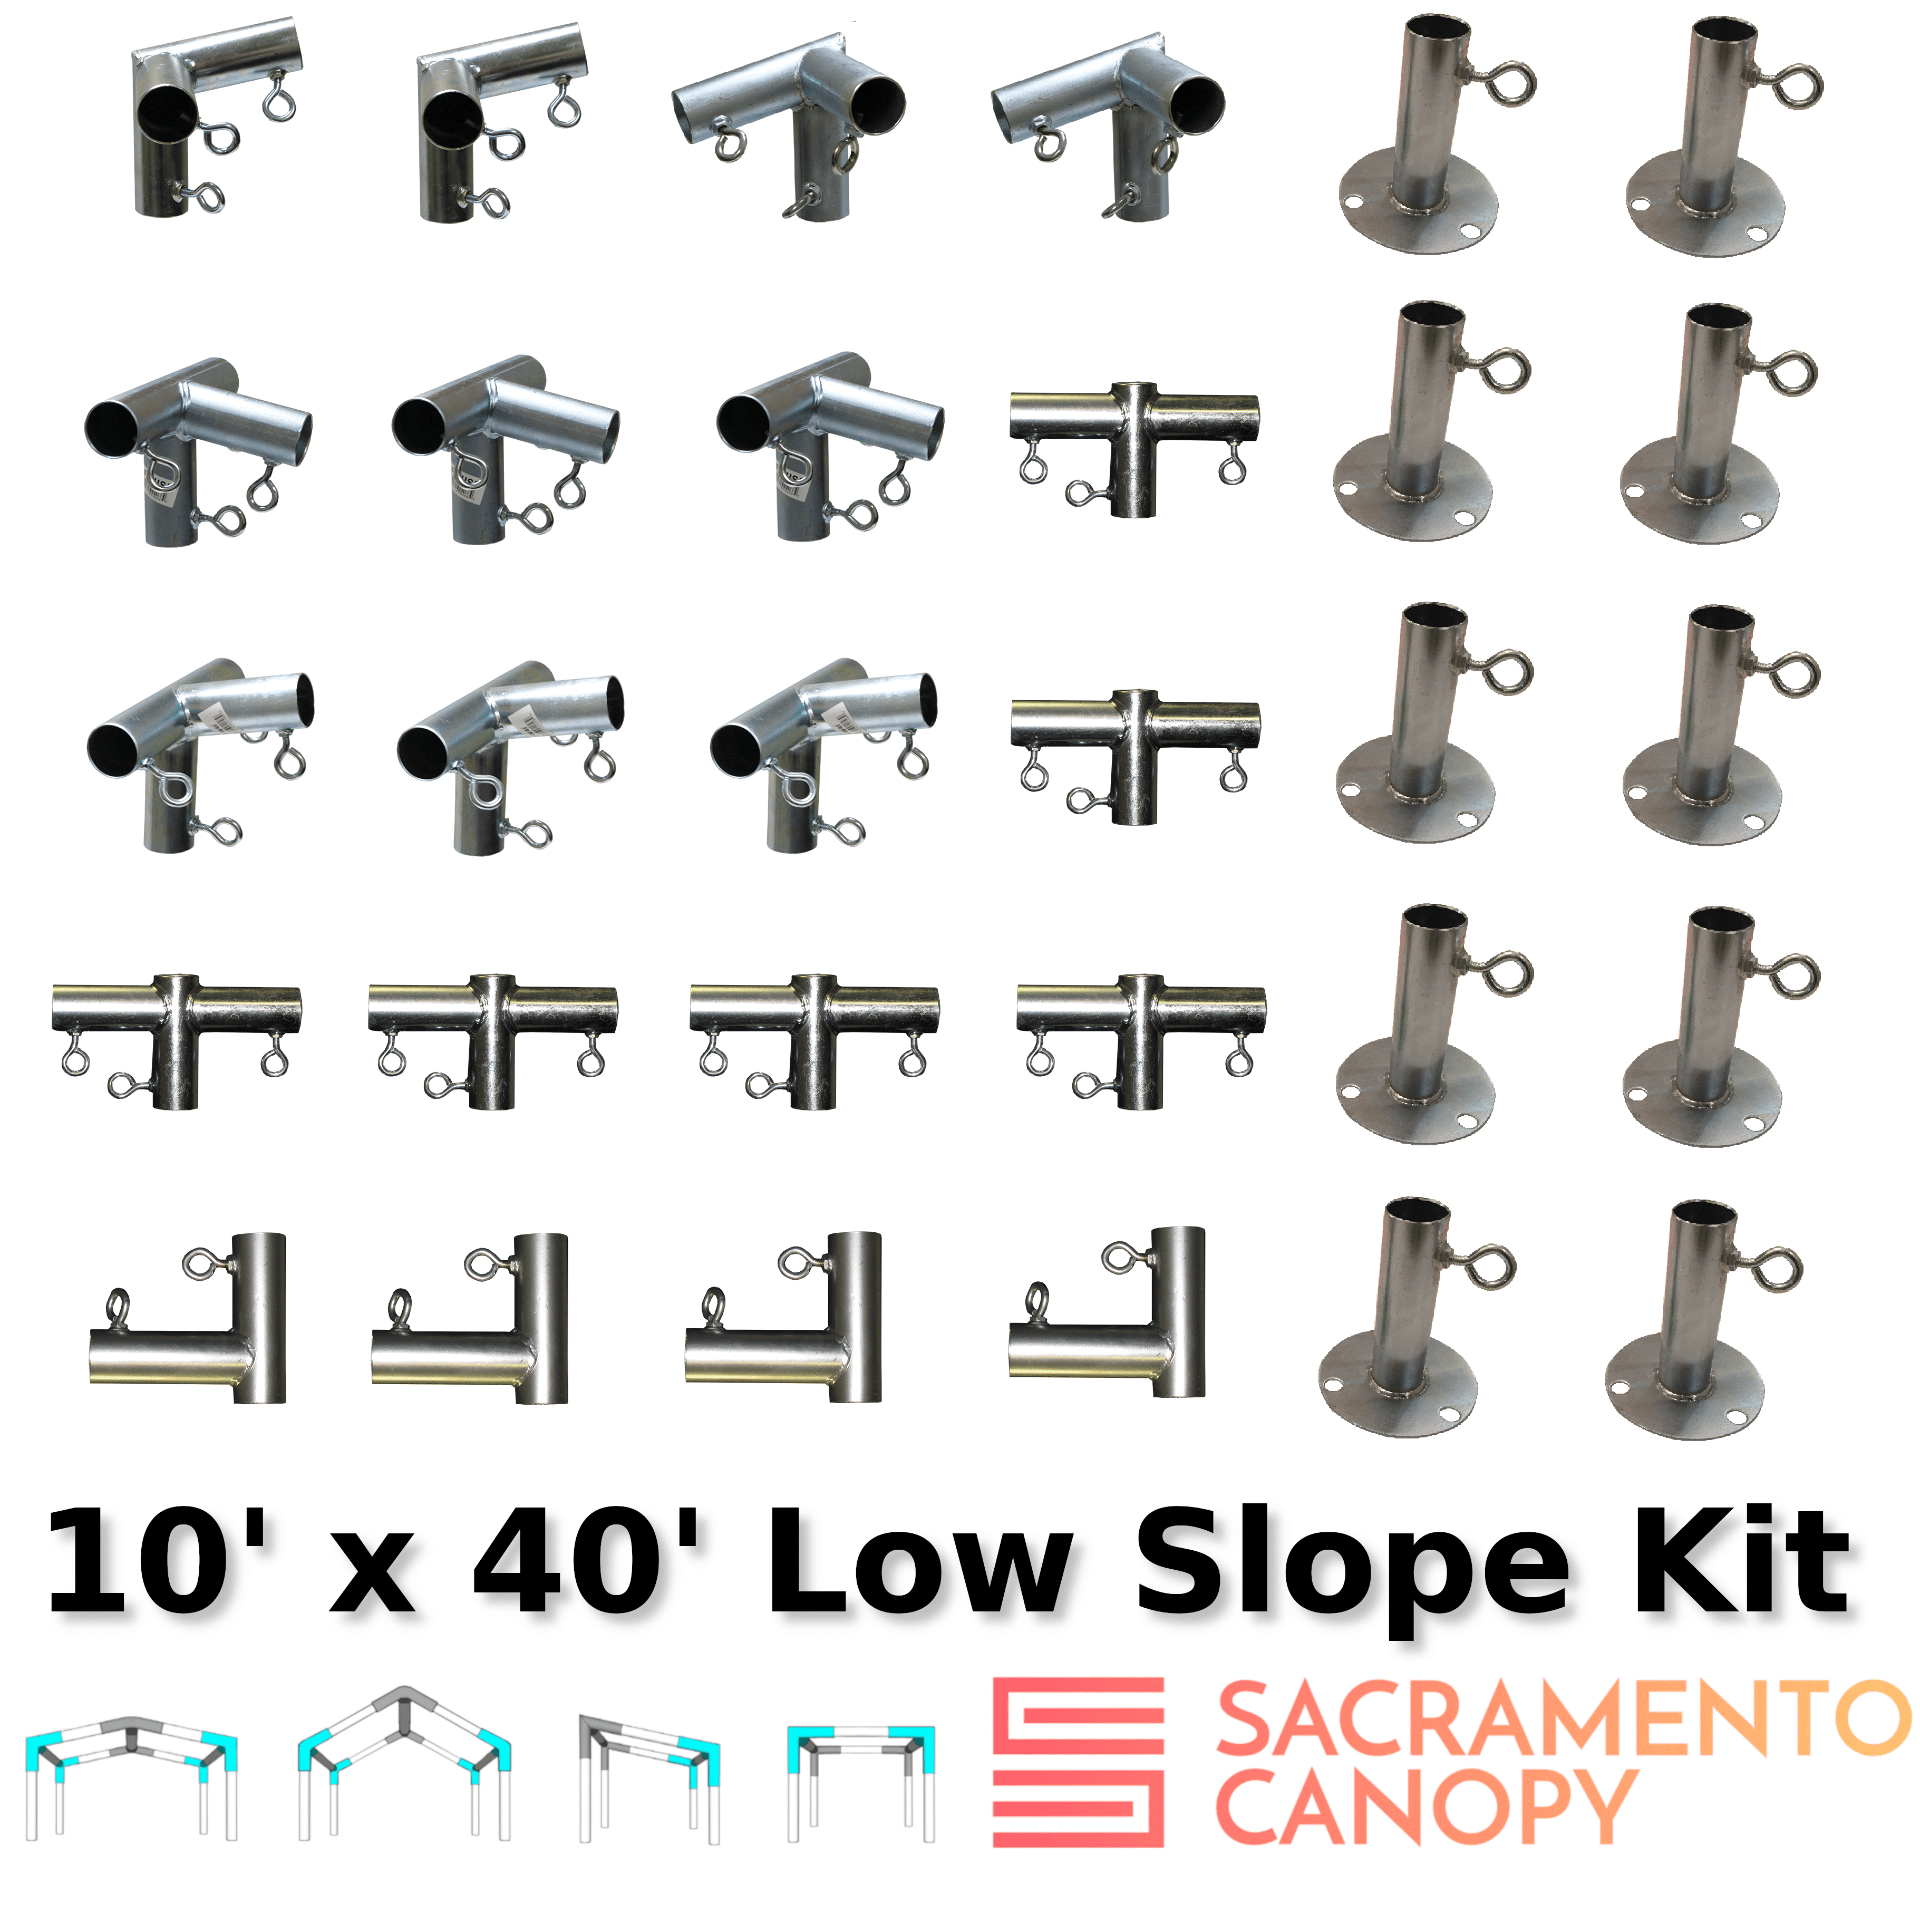 Slope Roof Canopy Fittings Kits (10 Wide) DIY Greenhouse, RV & Boat Carport, Shelter, Shade Structure, Vendor Booth, Tent, Steel Frame EMT Connector Parts, 1